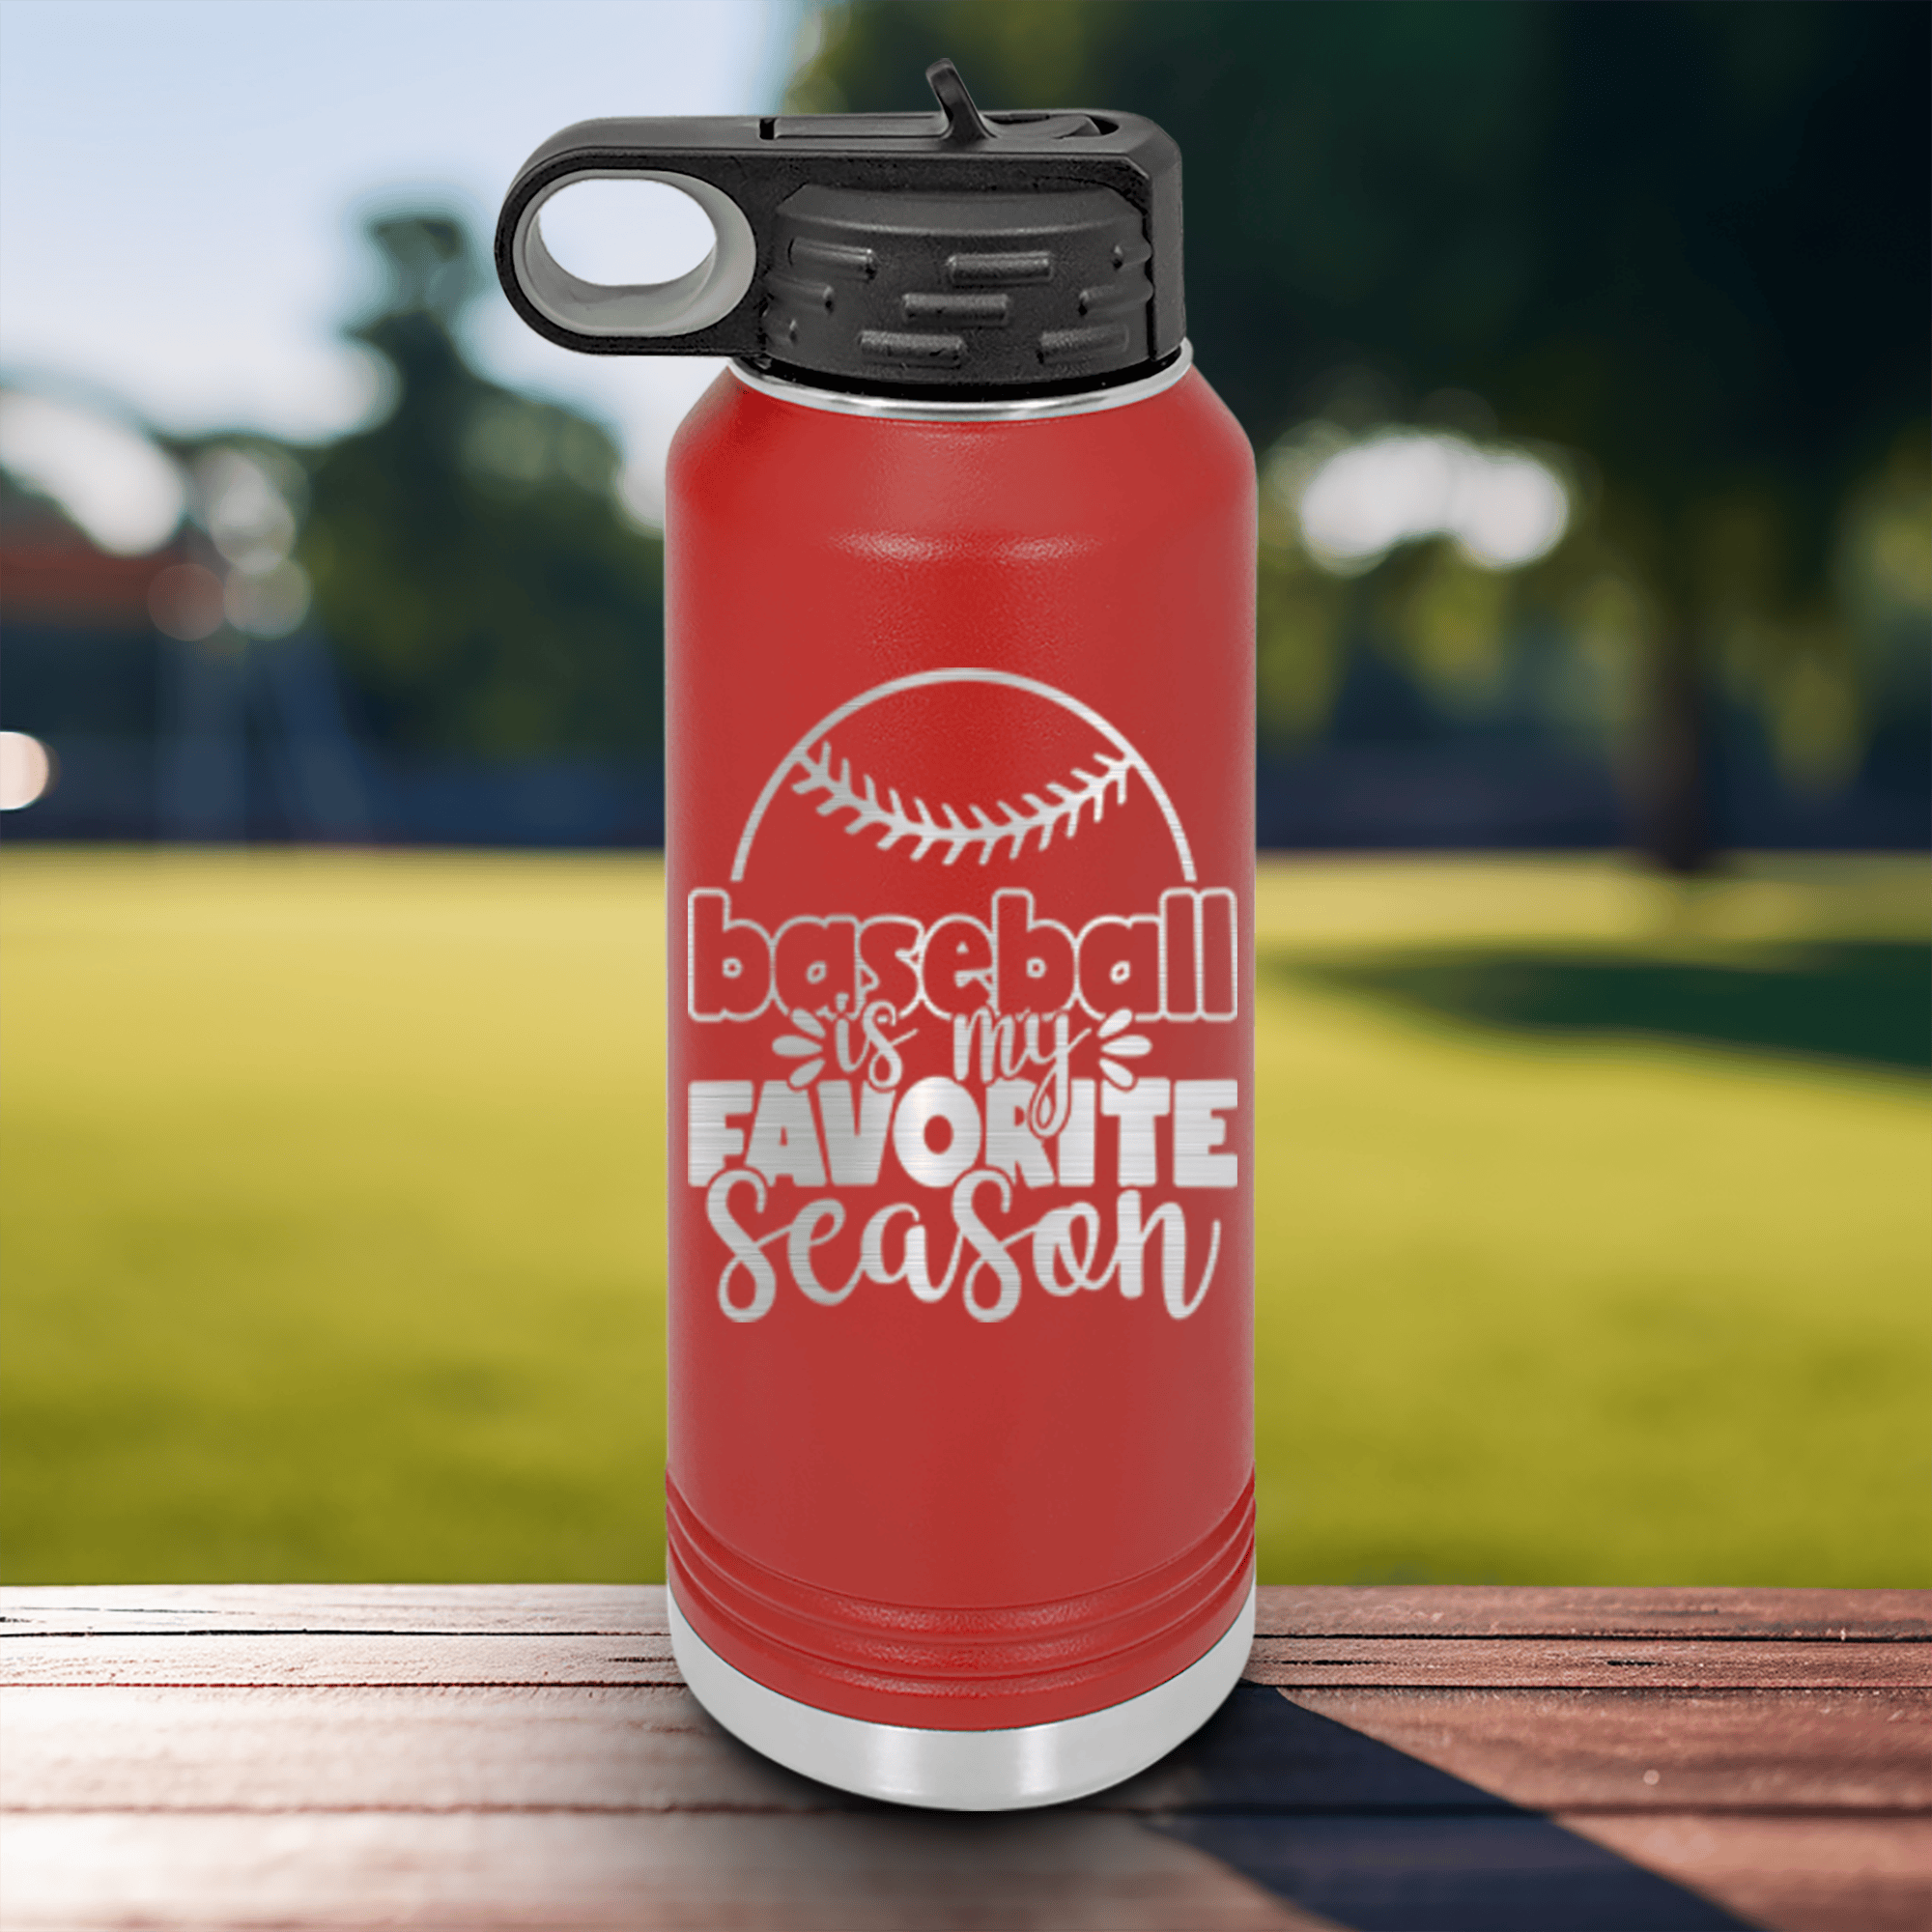 Red Baseball Water Bottle With Season Of Home Runs Design